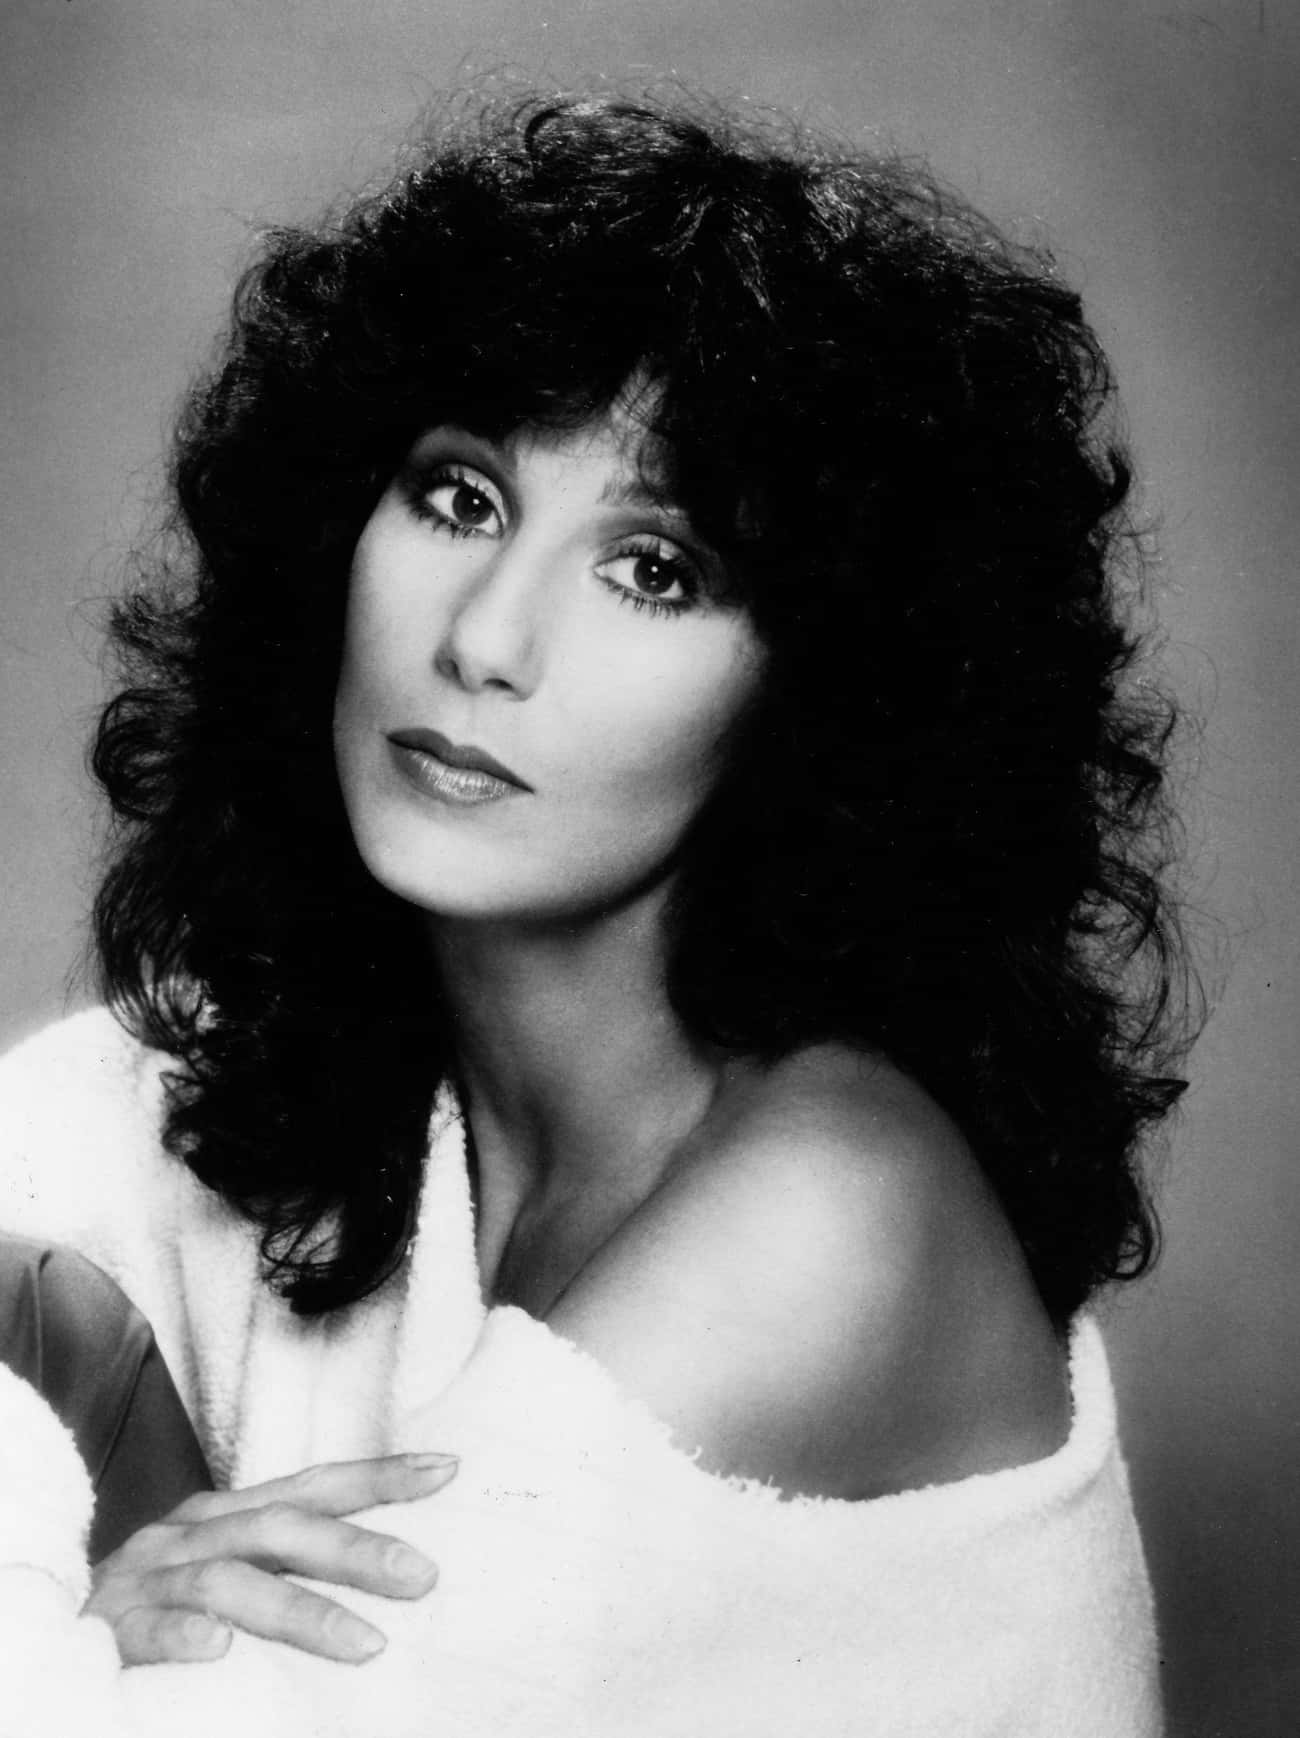 Cher Said Cruise Was One Of Her ‘Top Five’ Lovers